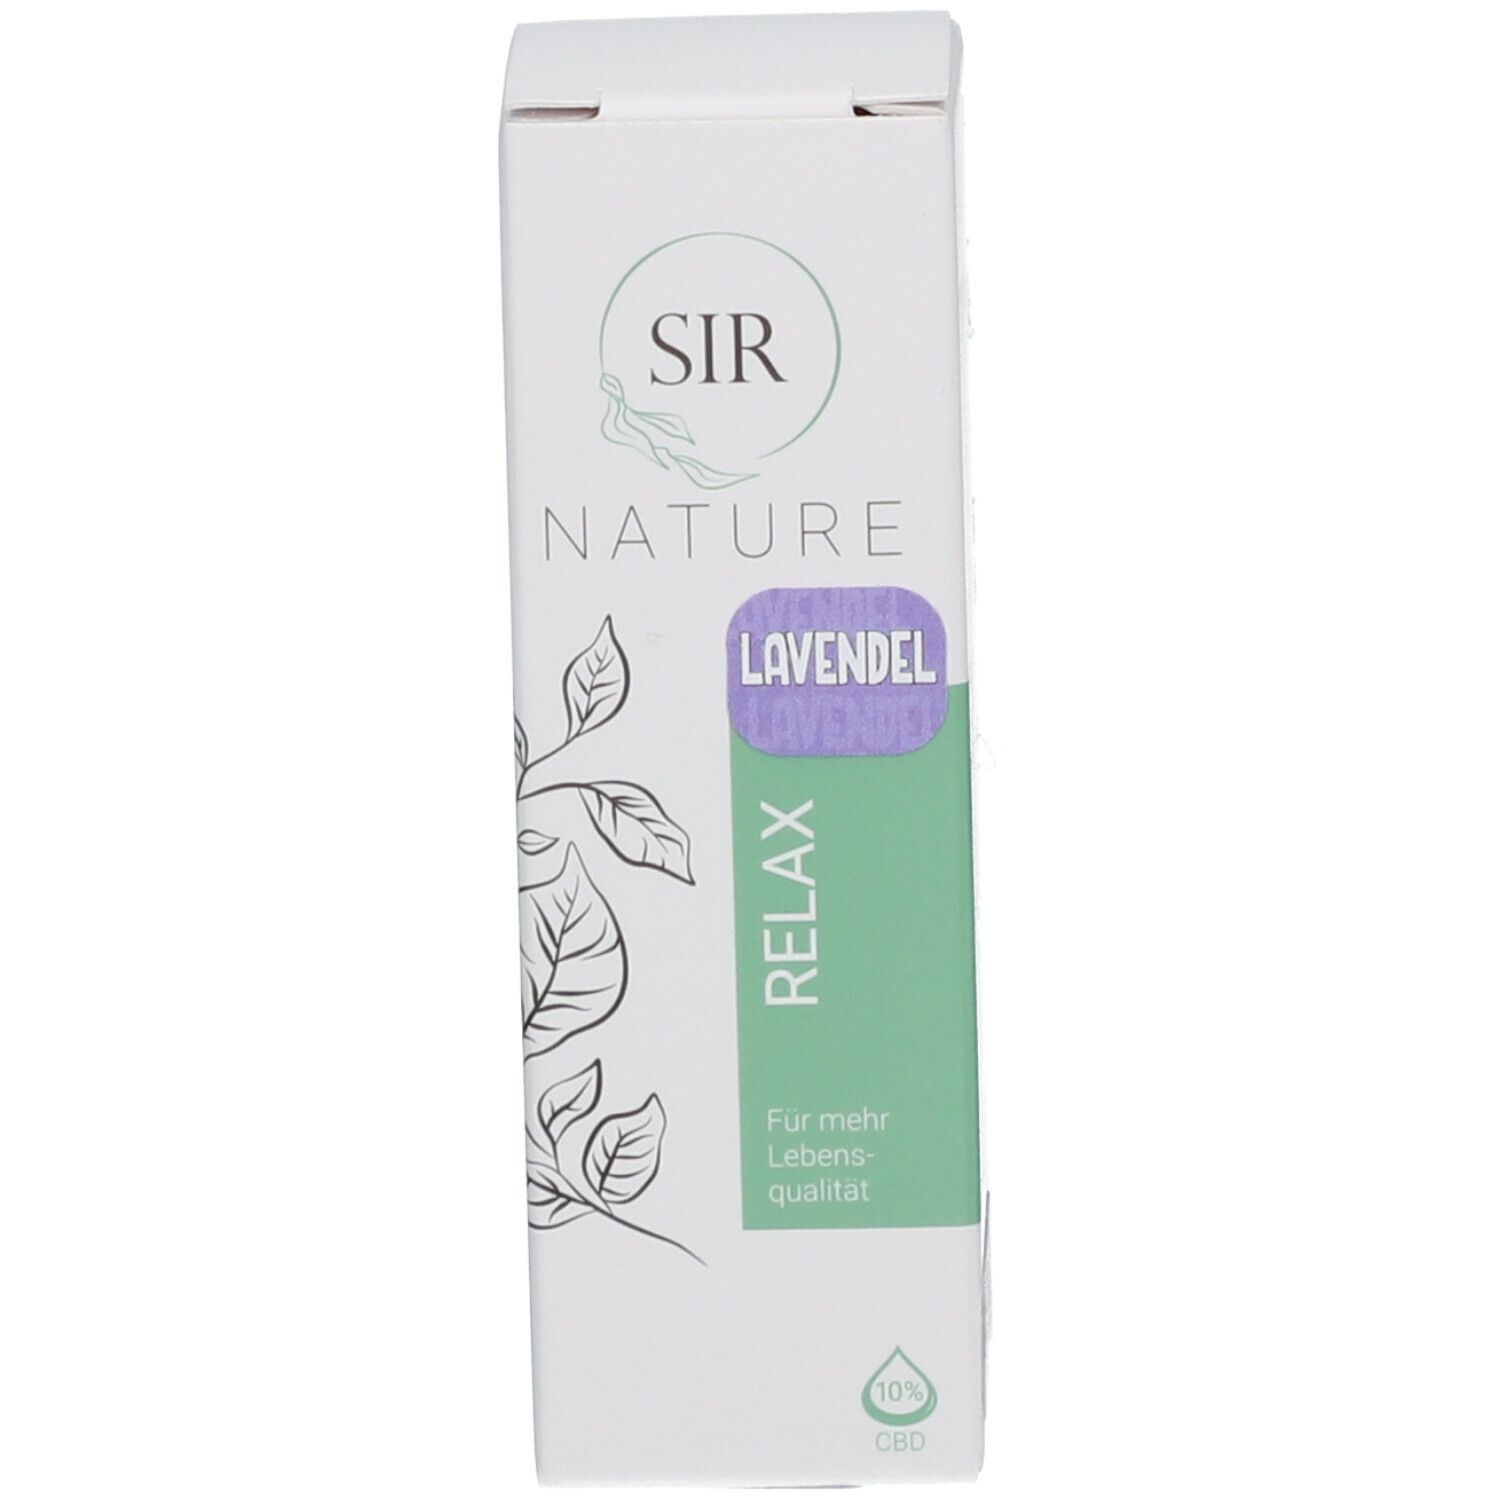 SIR NATURE Relax Lavendel 10 %